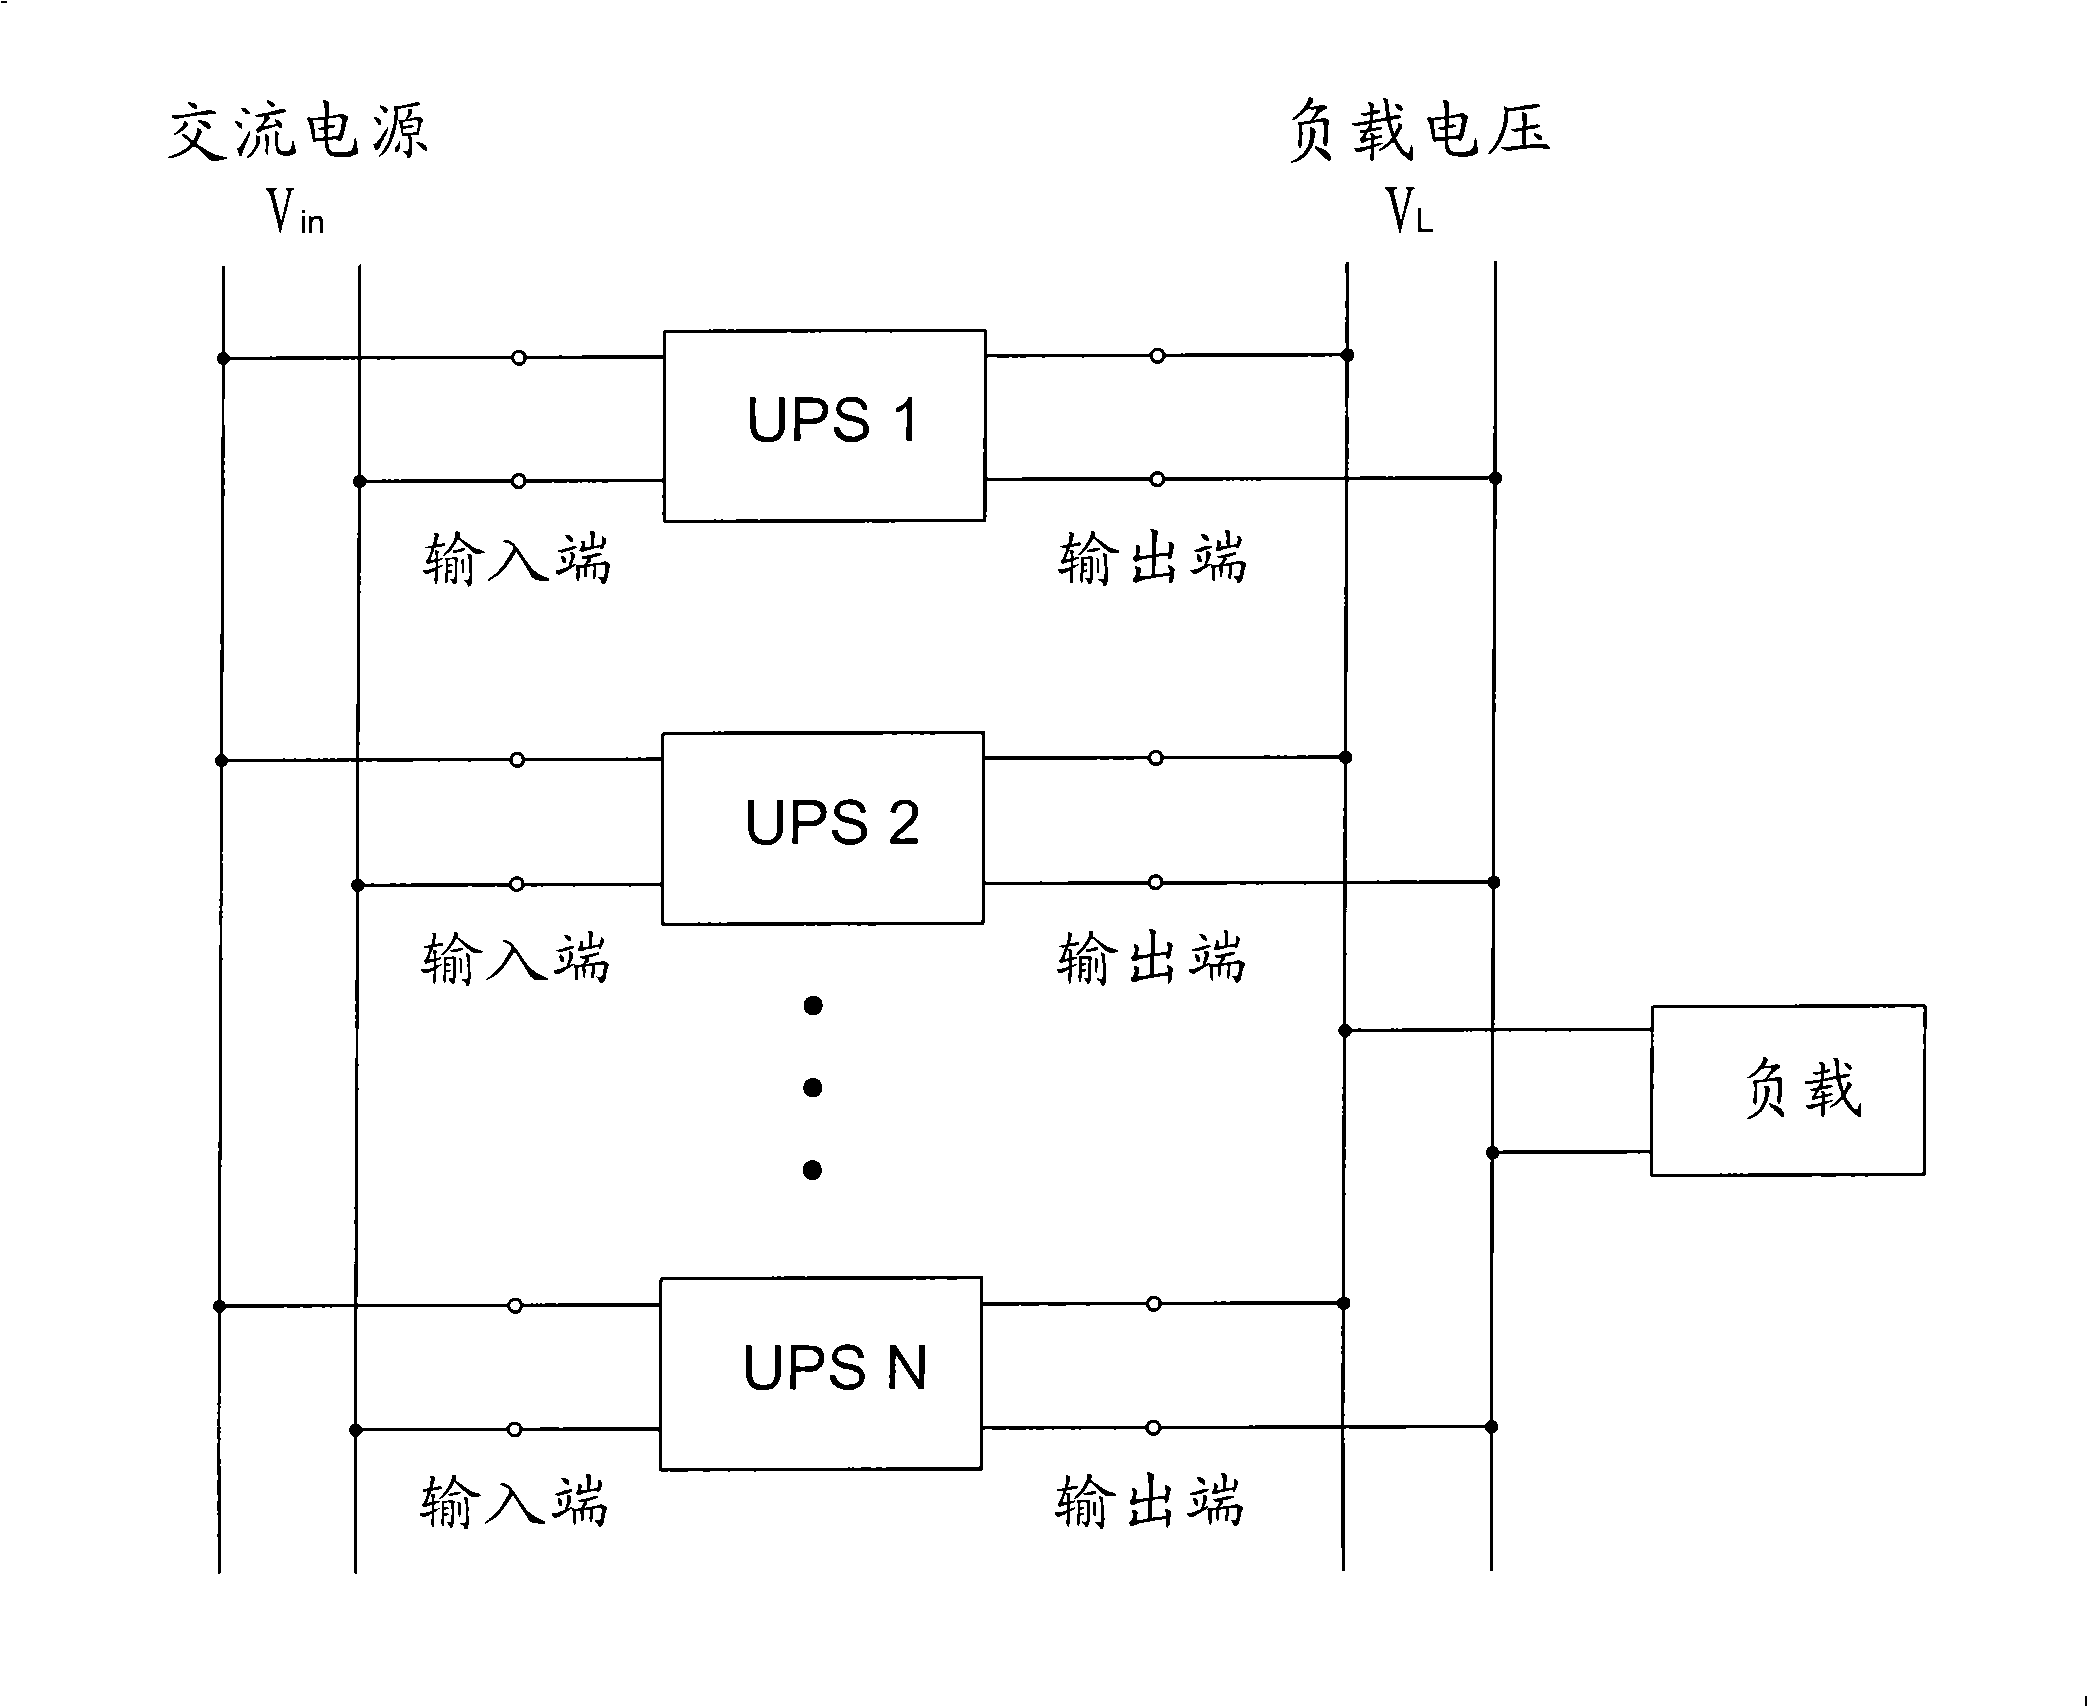 Uninterrupt power supply system with parallel operation function